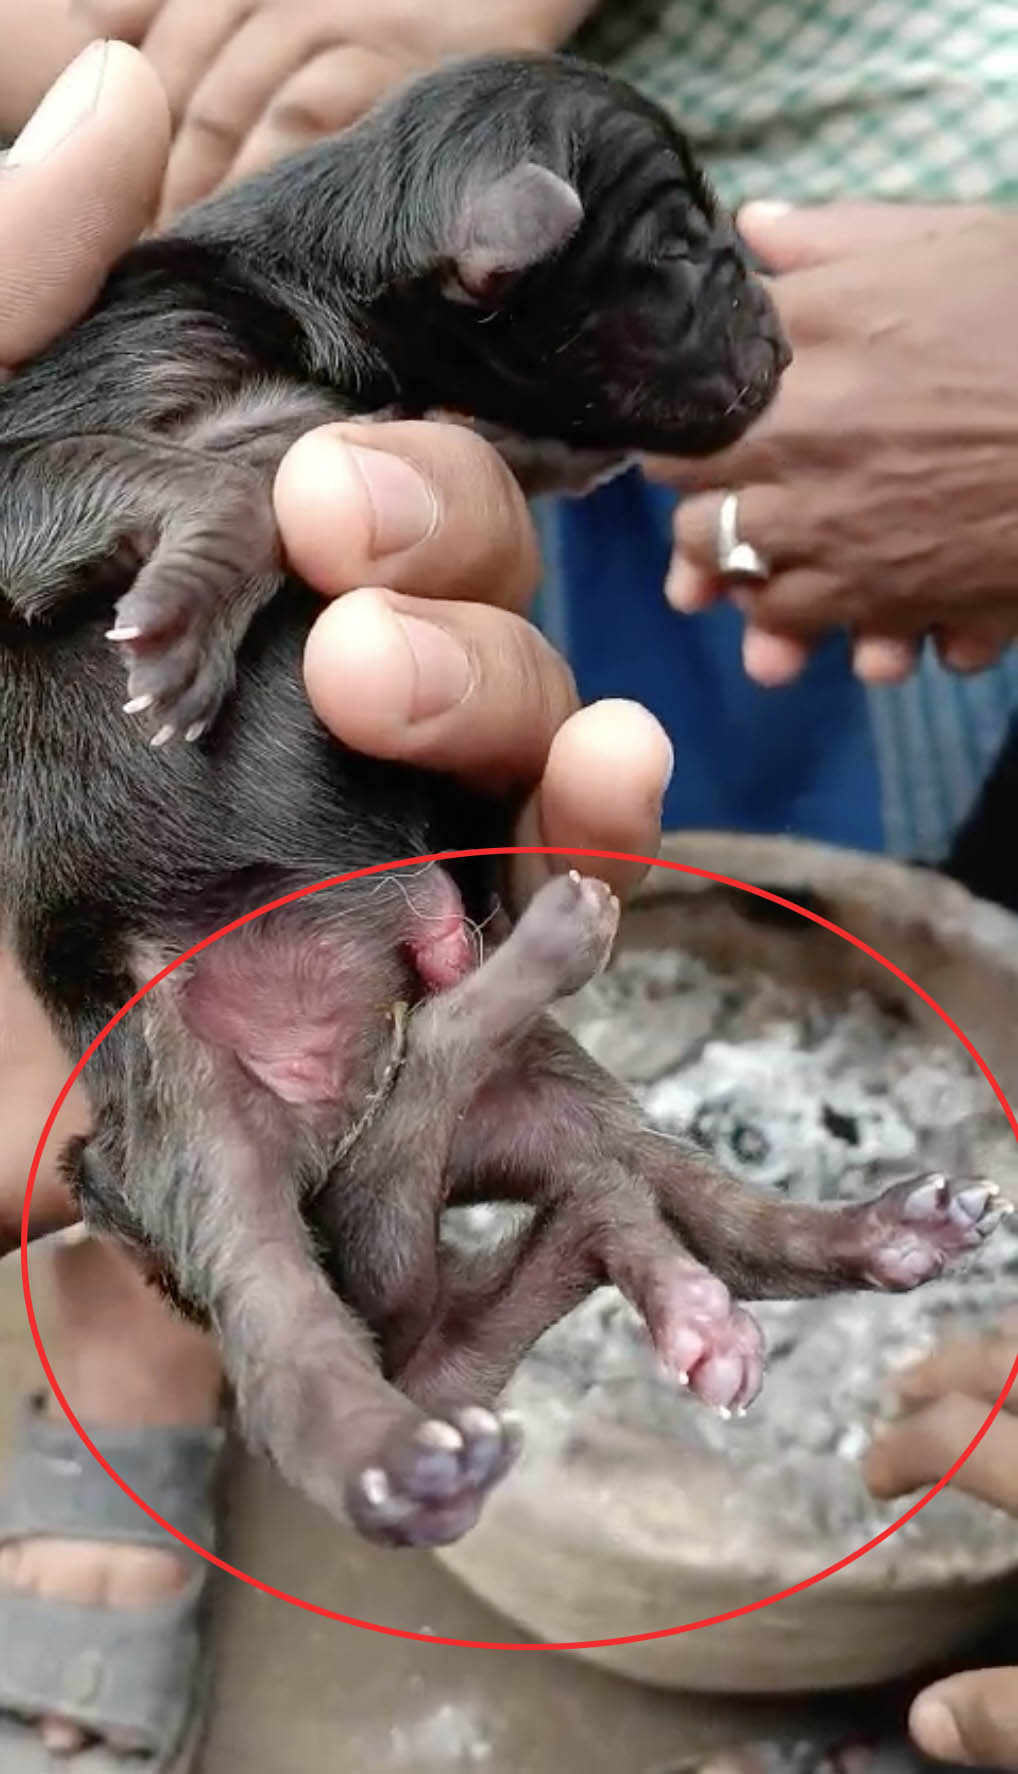 Video grab the Puppy born with SIX LEGS leaves owner stunned.